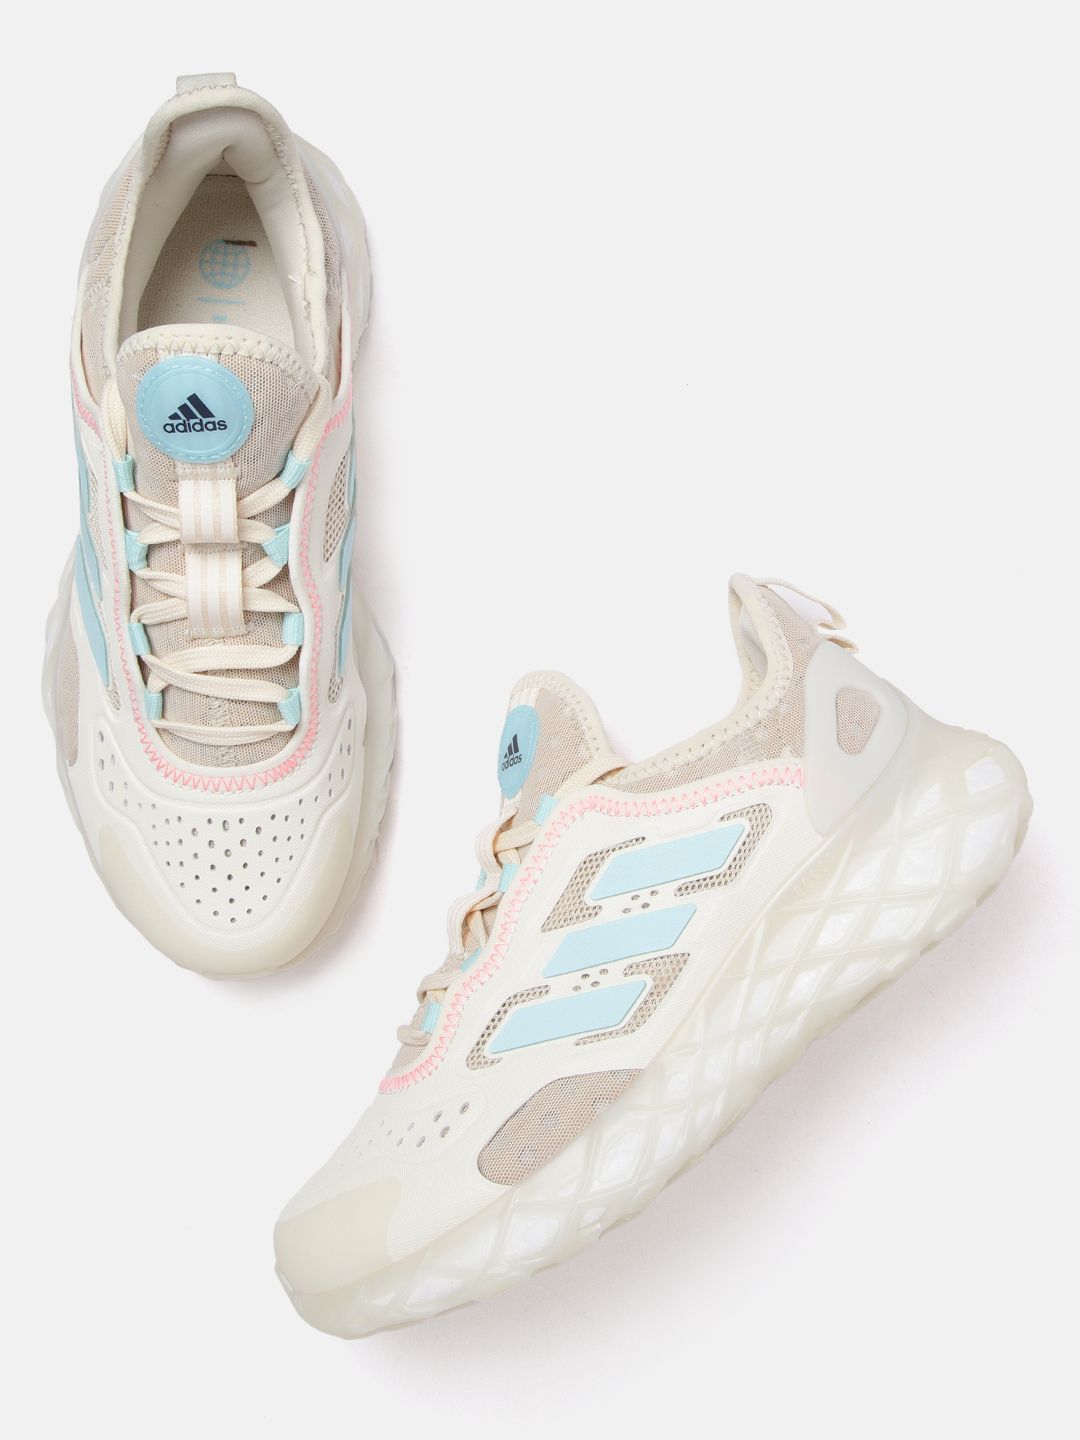 ADIDAS Women Off White Woven Design Perforated Web Boost Running Shoes Price in India